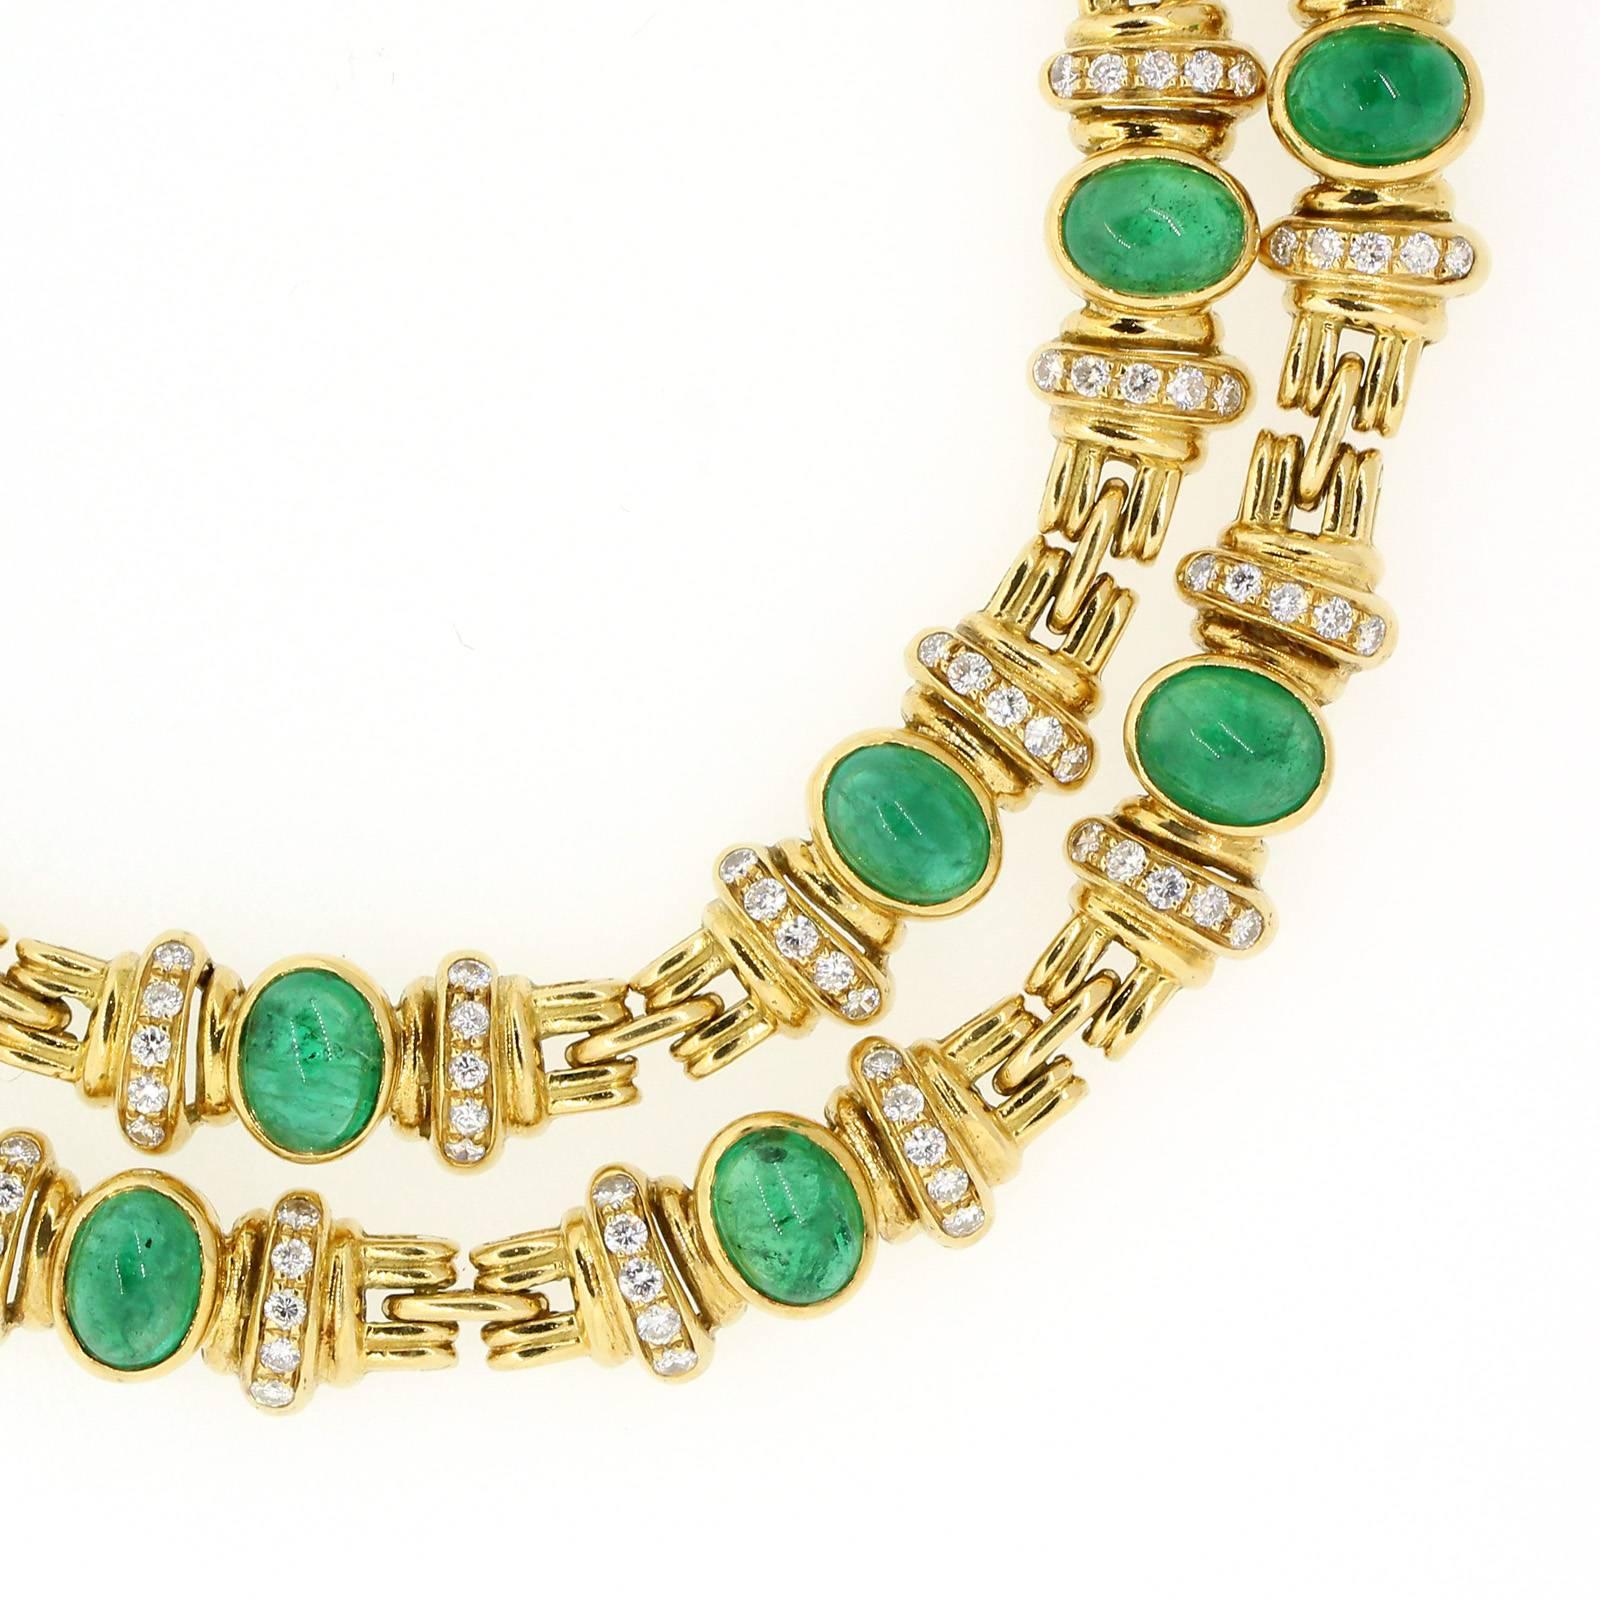 This stylish 18KT yellow gold double strand necklace features seven cabochon cut Colombian Emeralds.  The necklace is designed  with  twenty four half roundels, fourteen of which are accented with a total of 2.10 carats of Round Brilliant Cut